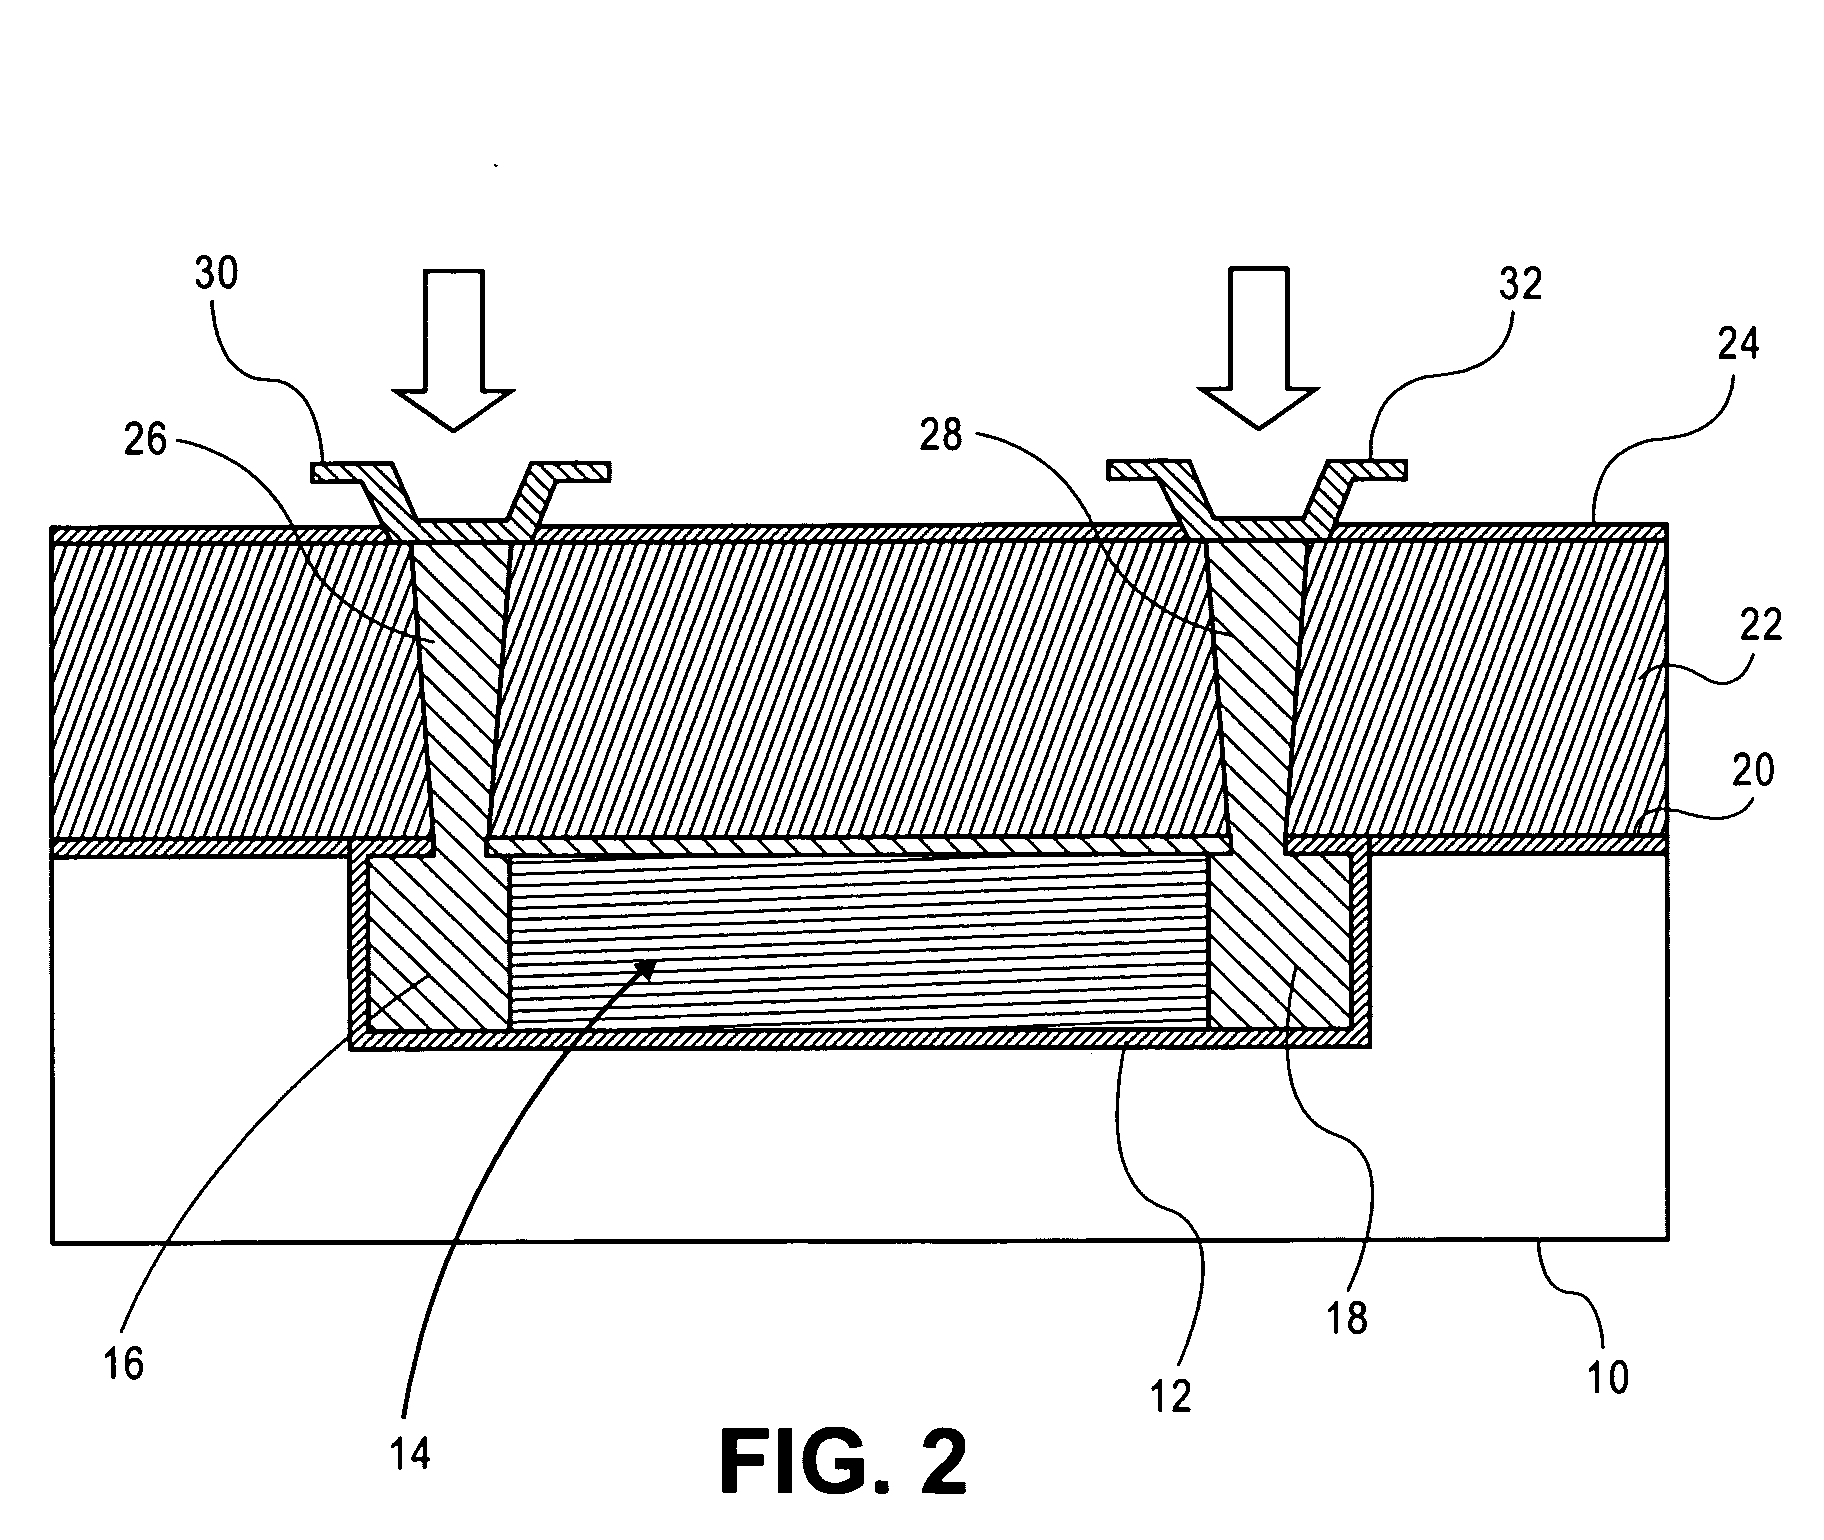 Stress sensor for in-situ measurement of package-induced stress in semiconductor devices